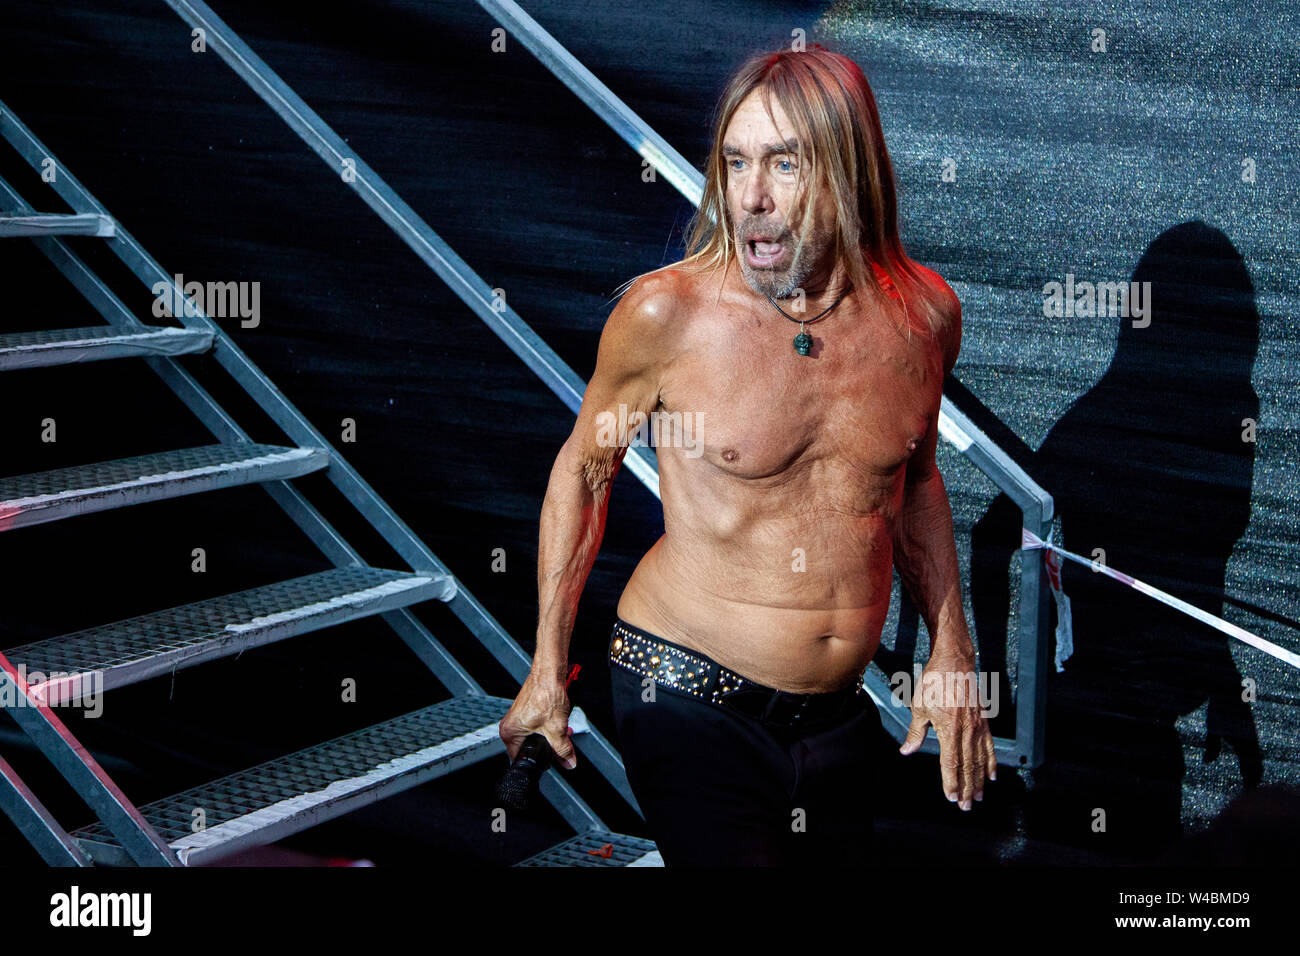 Link køn Advarsel Trondheim, Norway - June 29th, 2019. The American singer, musician and rock  legend Iggy Pop performs a